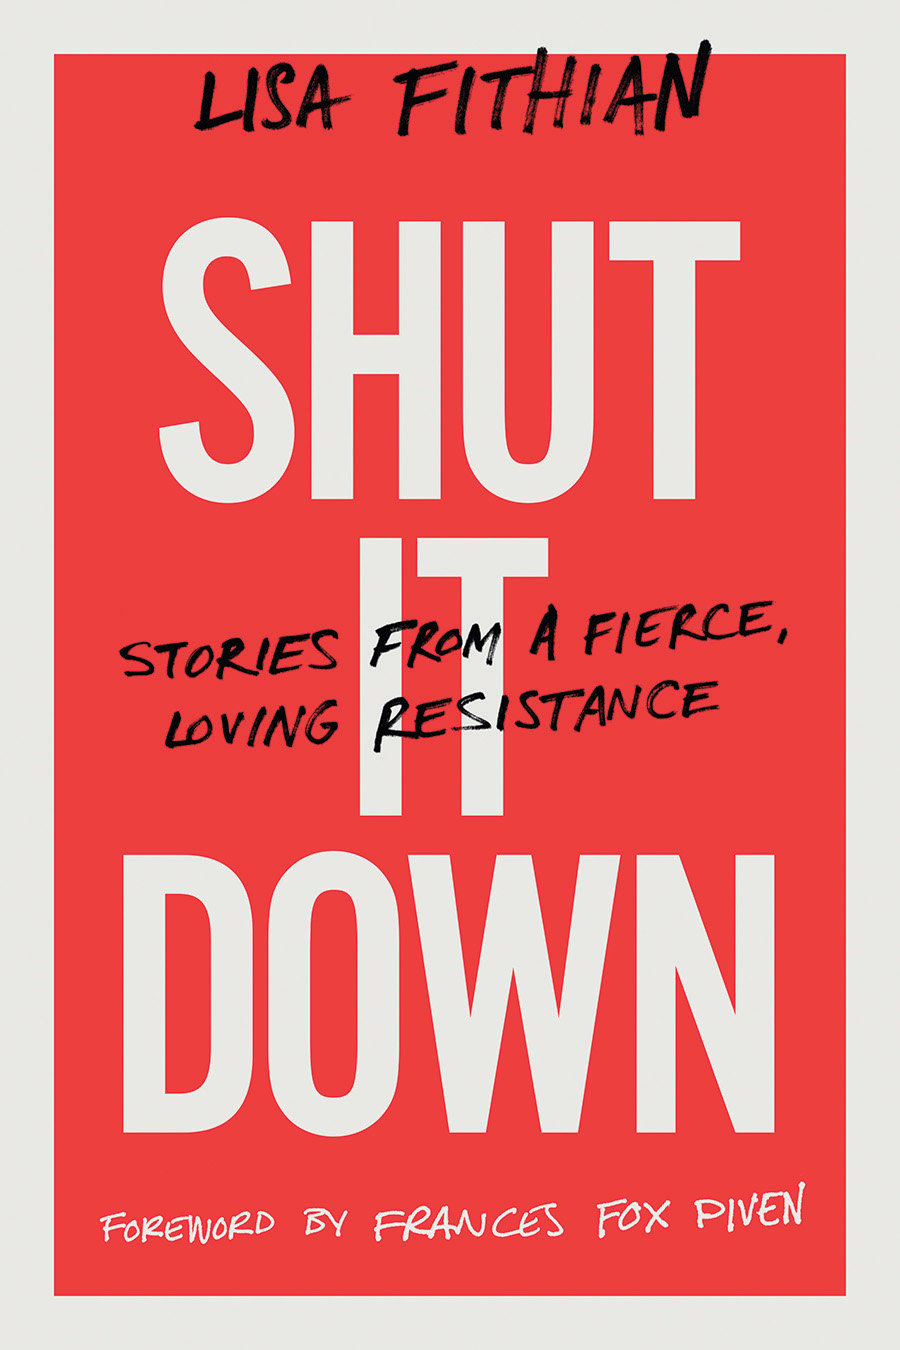 The Shut It Down cover